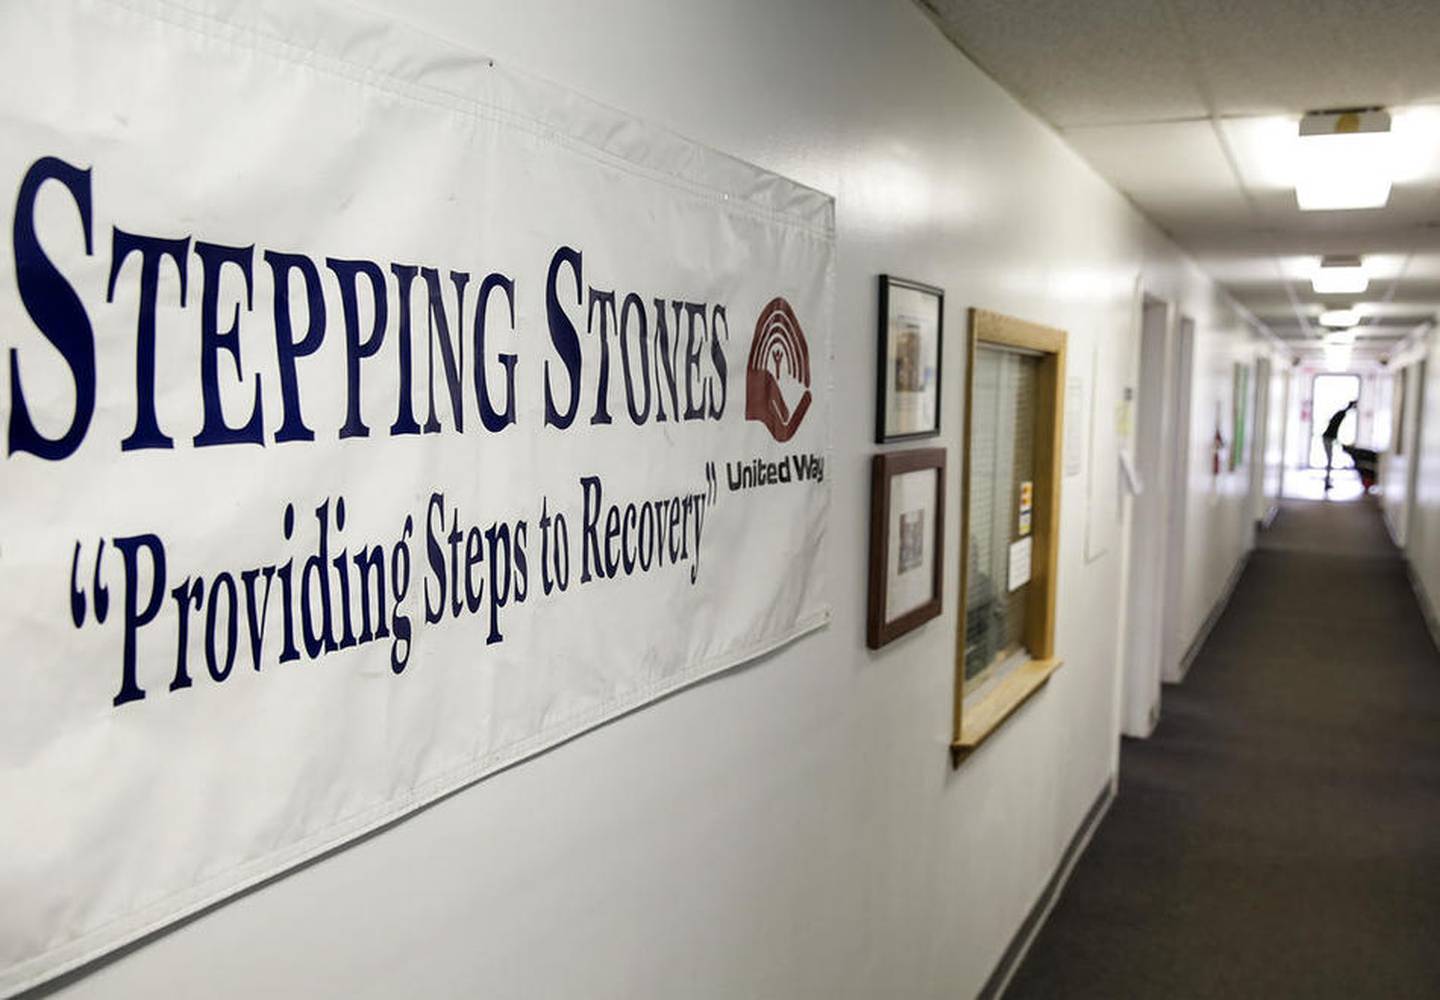 A "Stepping Stones" banner hangs March 25 near the lobby of the Stepping Stones facility in Joliet.